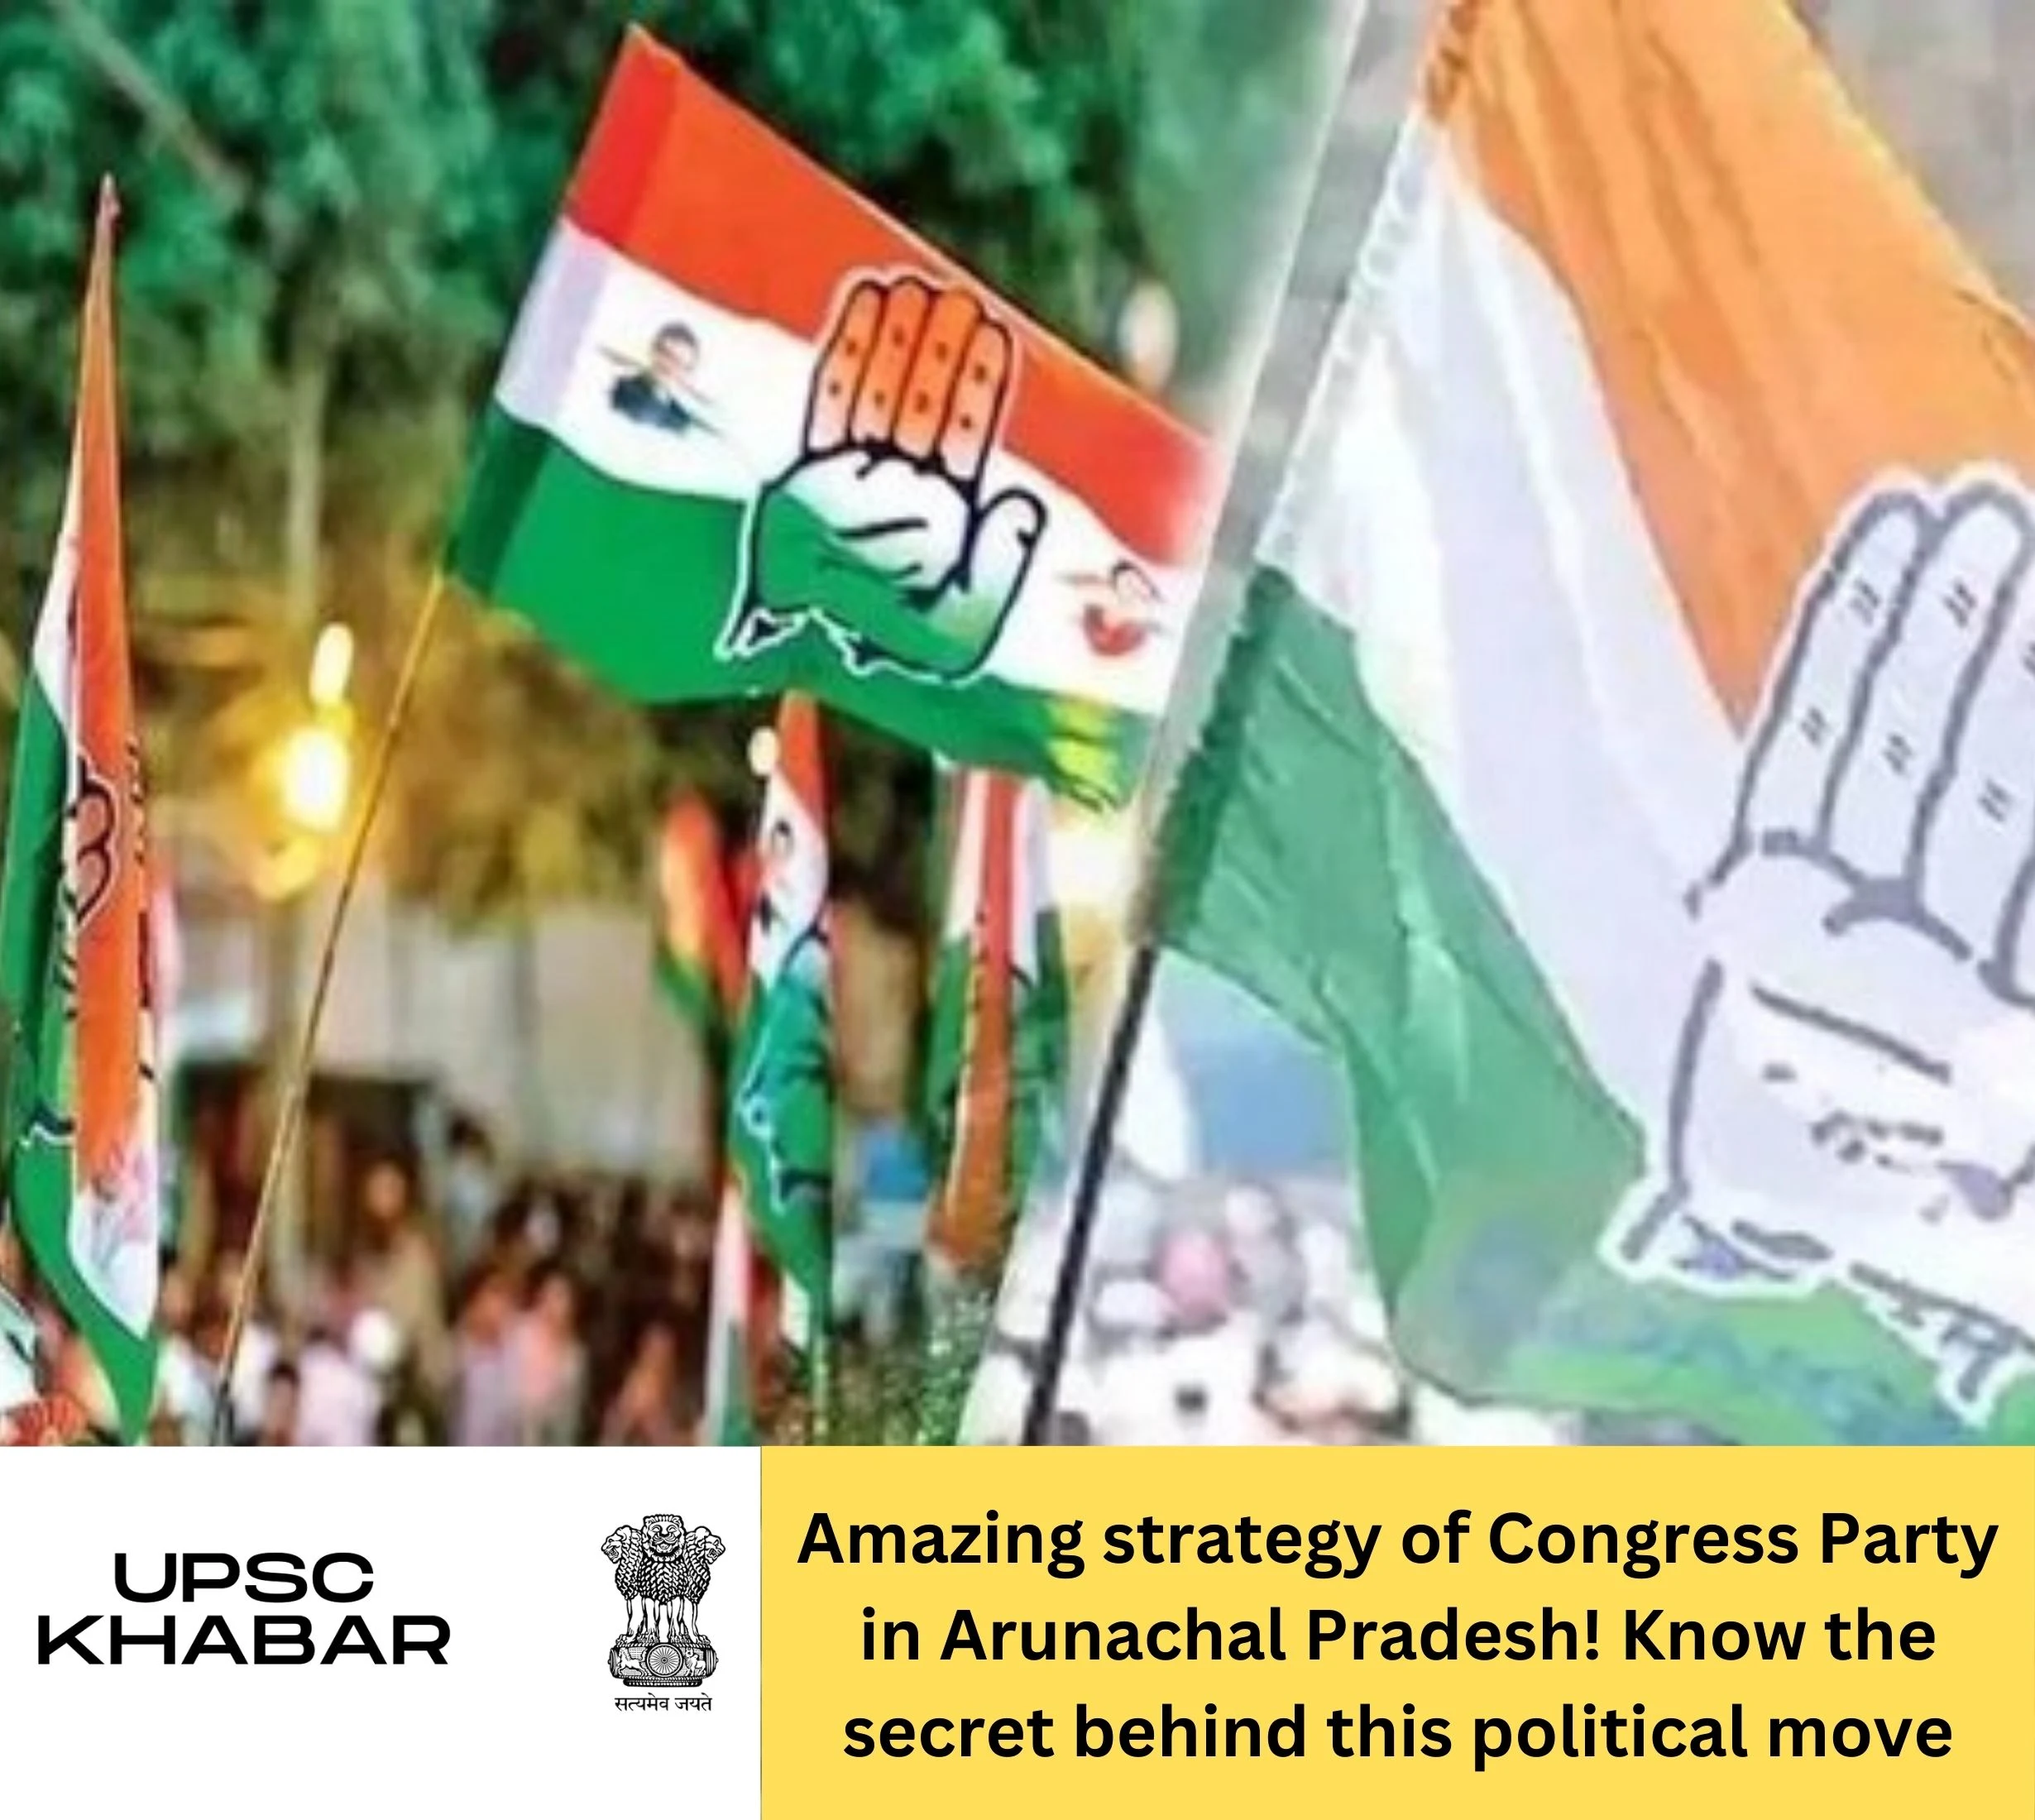 Amazing strategy of Congress Party in Arunachal Pradesh! Know the secret behind this political move